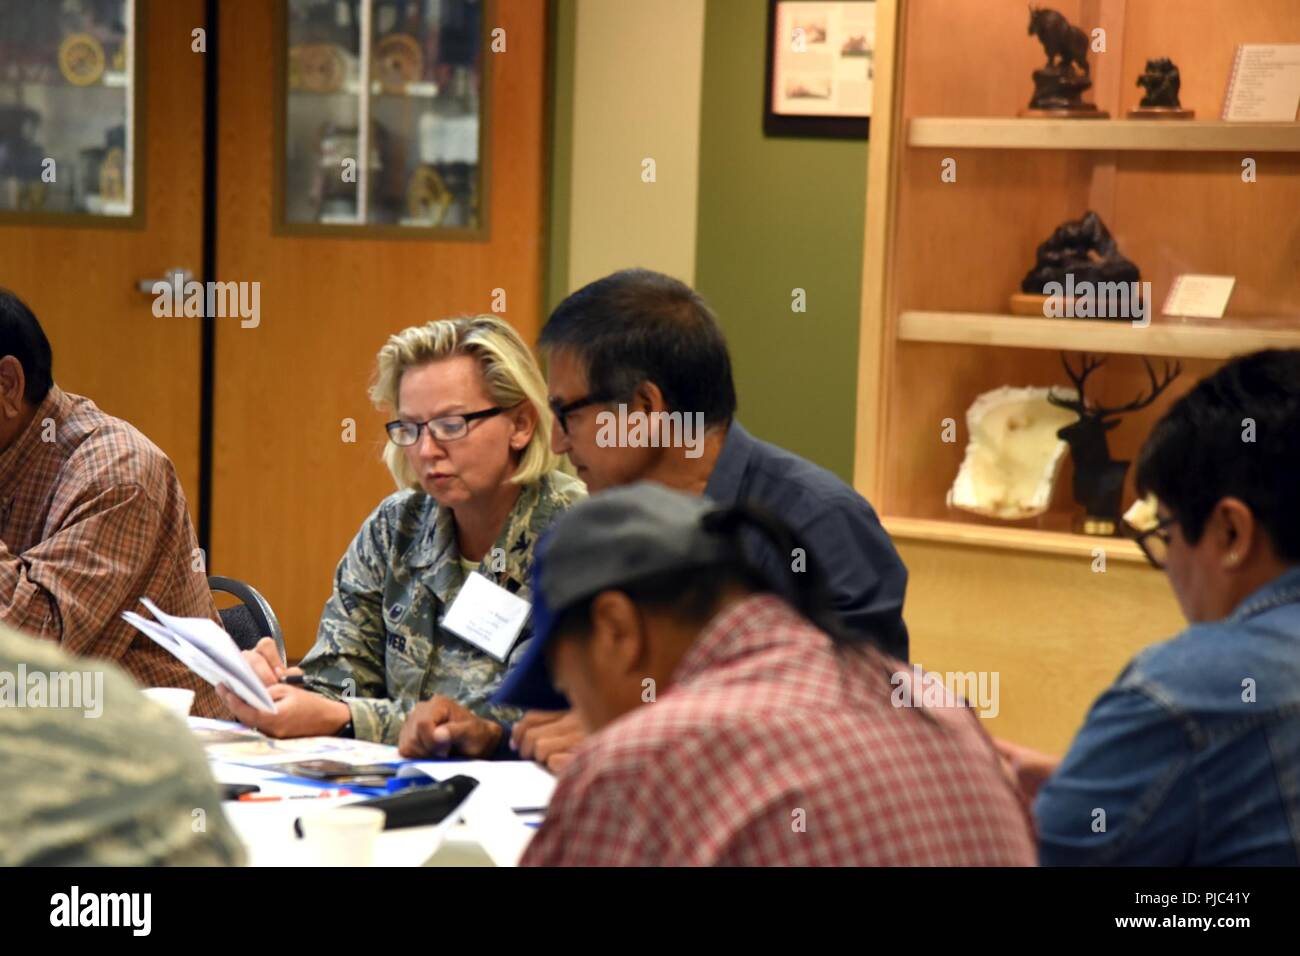 Col. Jennifer Reeves, 341st Missile Wing commander, and Conrad Fisher, Northern Cheyenne Tribe vice president, exchange information at the third annual tribal relations meeting July 12, 2018, at the C.M. Russell Museum, in Great Falls, Mont. Members of the Blackfeet Nation, Chippewa Cree Tribe, Confederated Salish and Kootenai Tribes, Crow Tribe, Fort Belknap Assiniboine and Gros Ventres Tribes and Northern Cheyenne Tribe also attended the meeting. Stock Photo